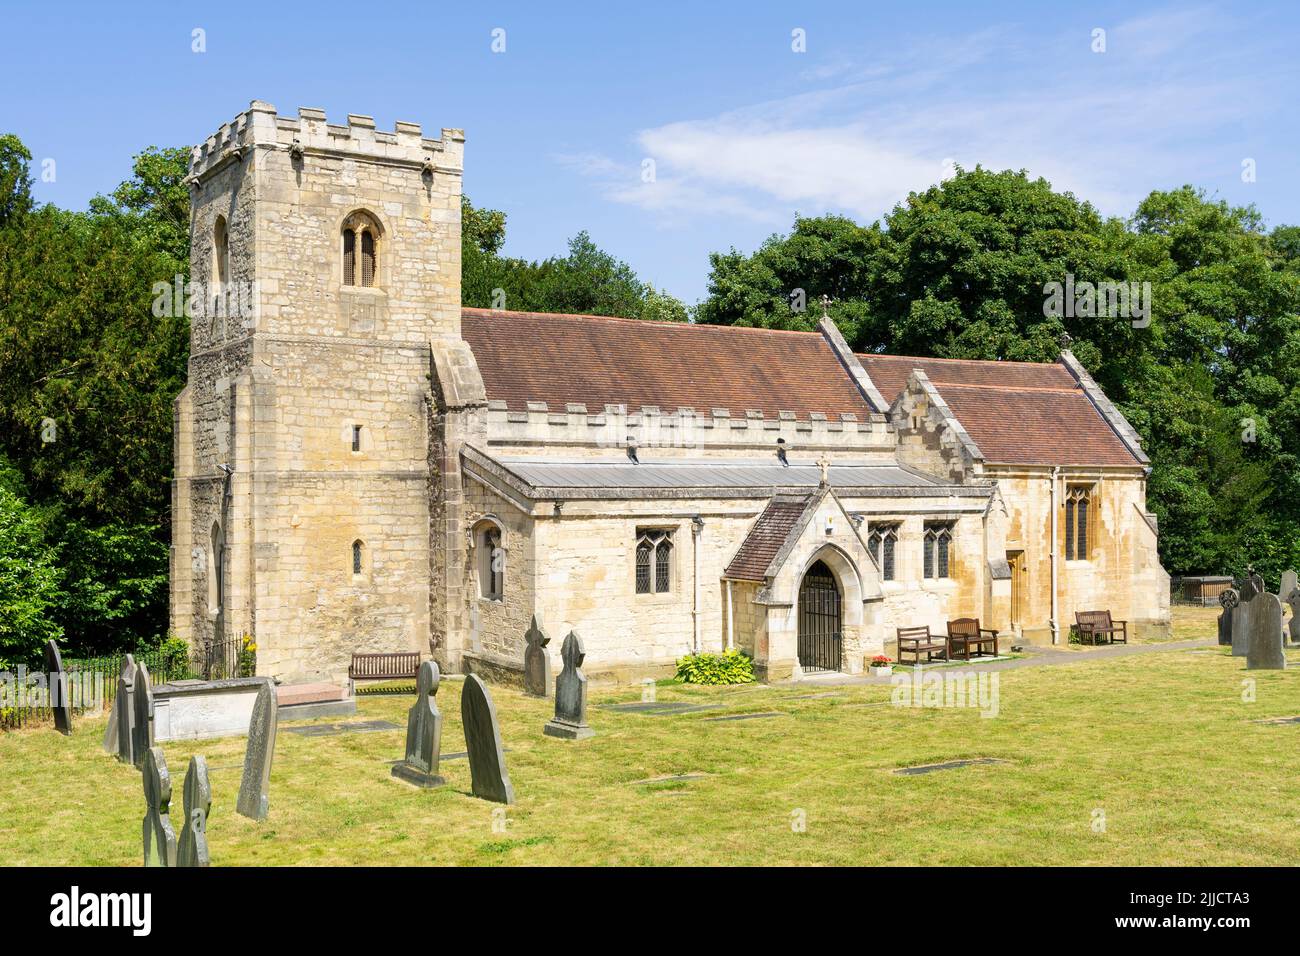 Brodsworth church the Parish Church of St Michael & All Angels church in the grounds of Brodsworth Hall near Doncaster South Yorkshire England UK GB Stock Photo